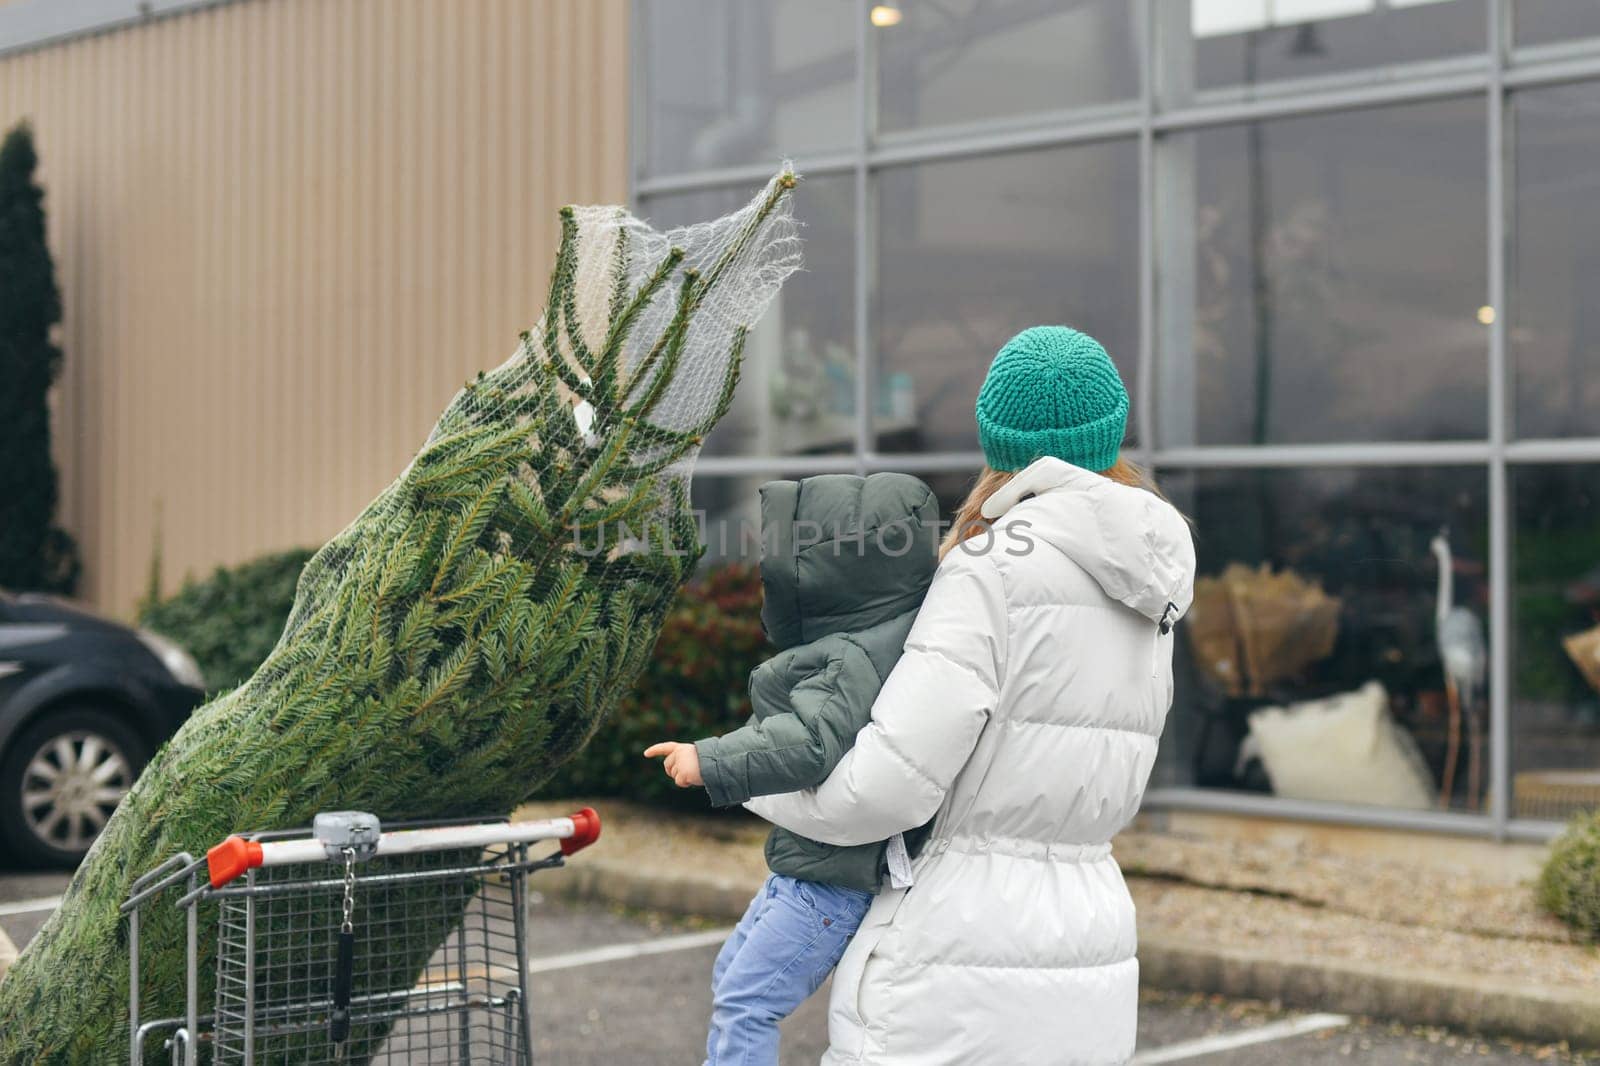 Mother bought a Christmas tree at the market